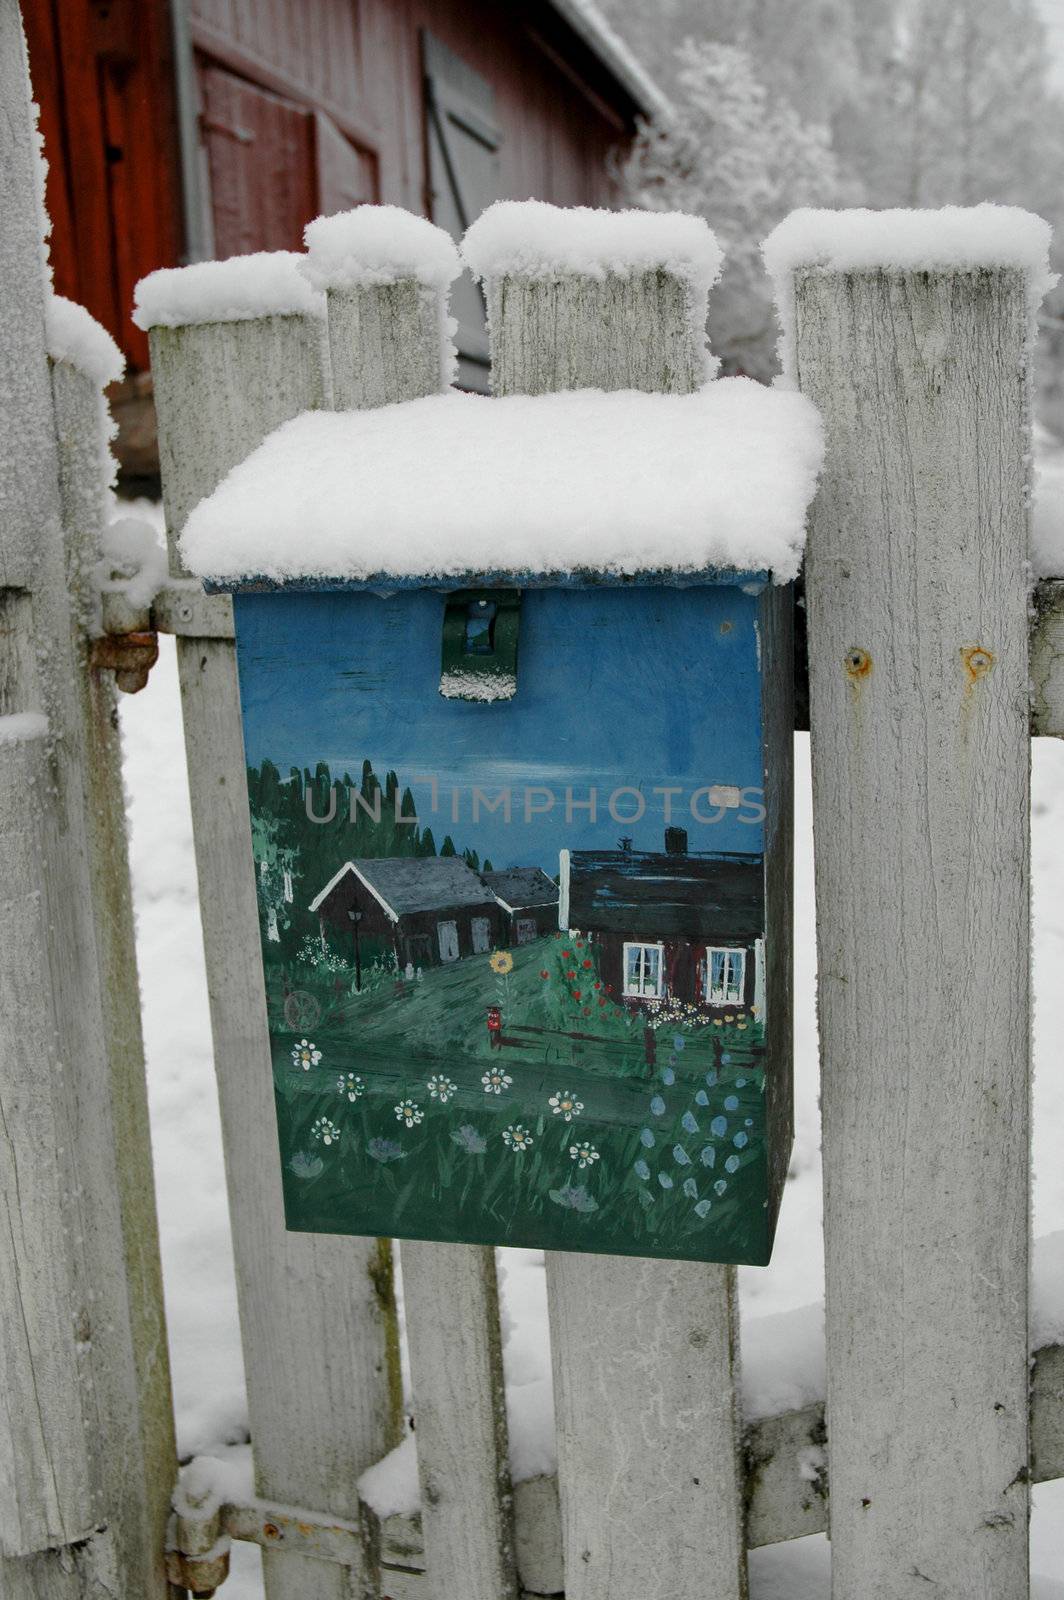 The painted mailbox is traditional ornament in Norway